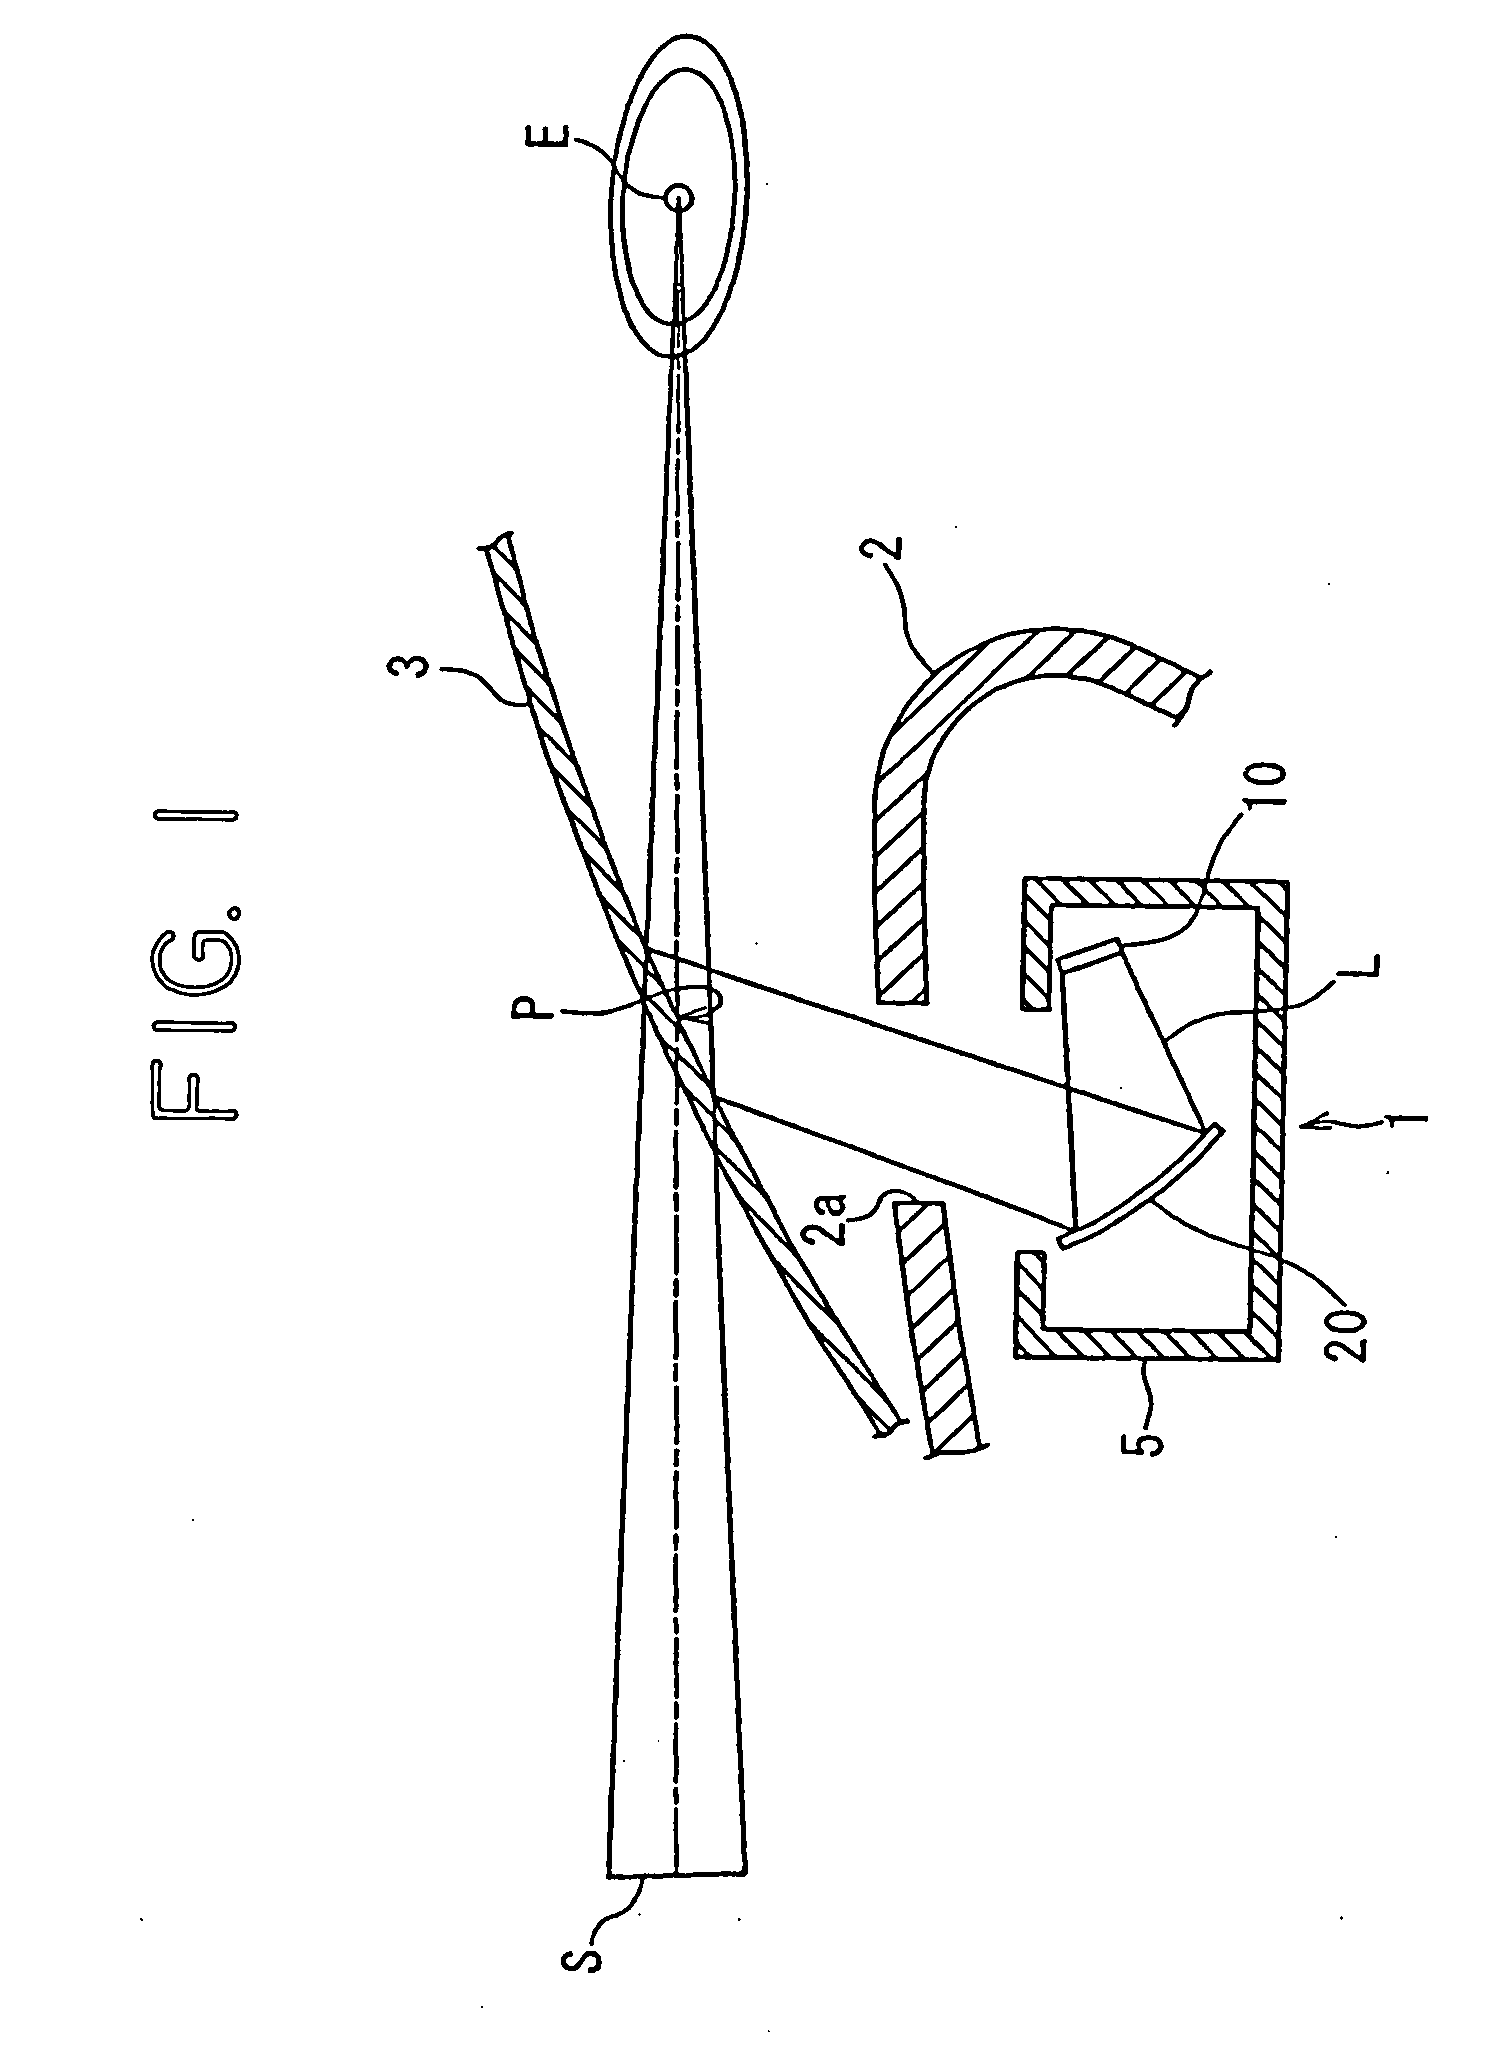 Display system for vehicle